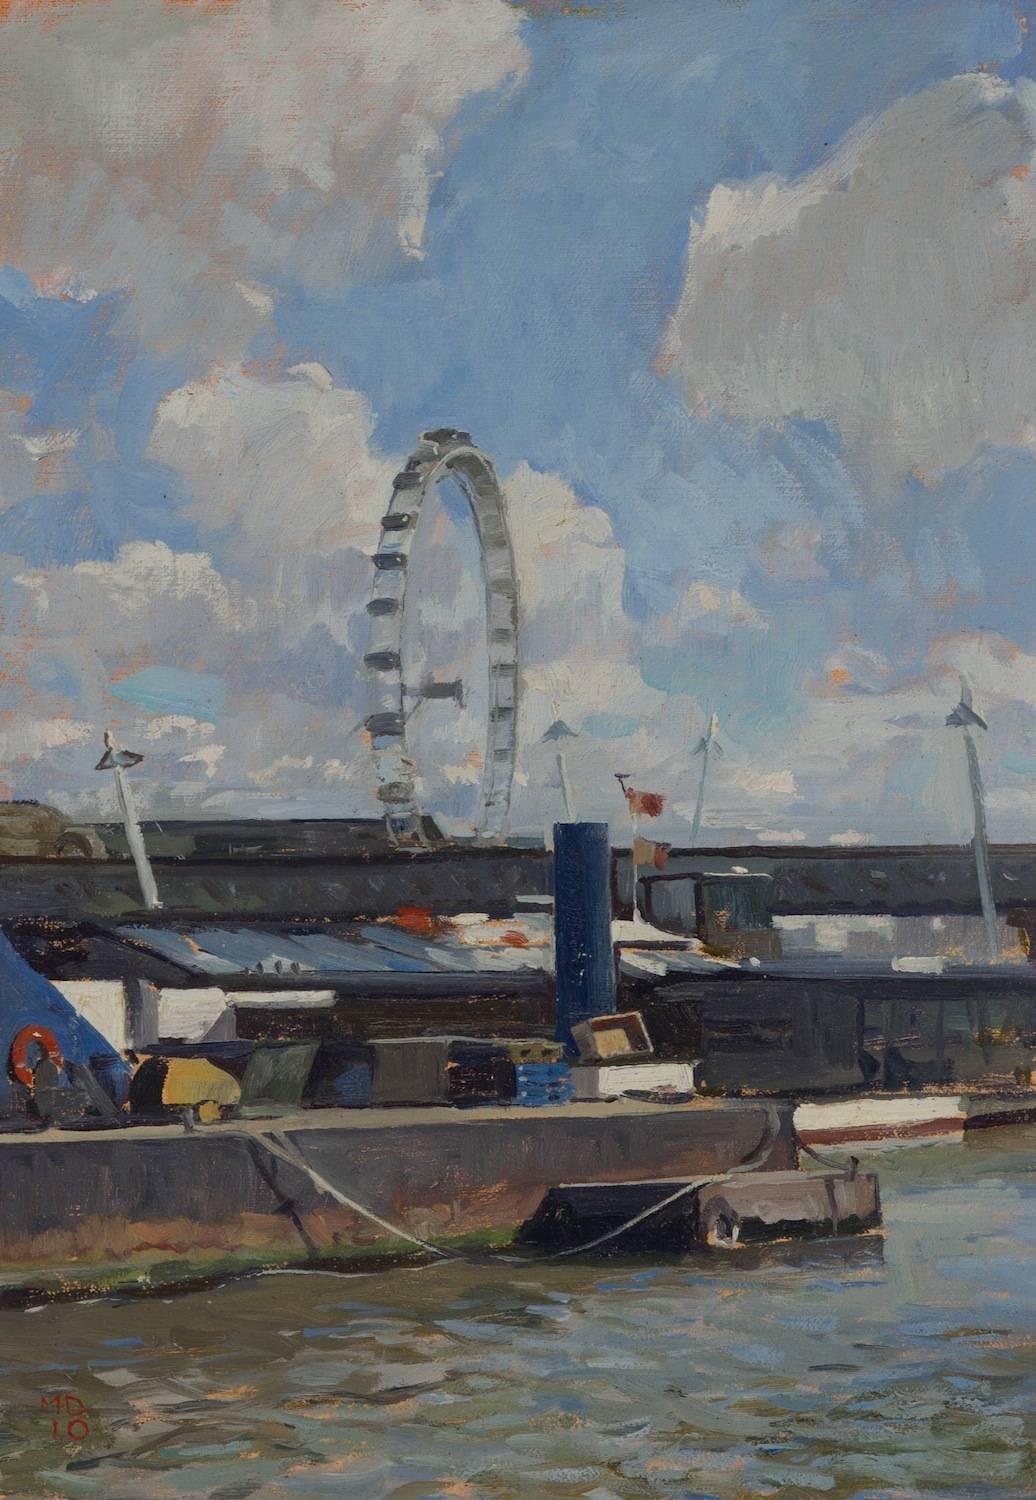 Marc Dalessio Landscape Painting - "London Eye" contemporary impressionist oil painting of famed Ferris Wheel in UK